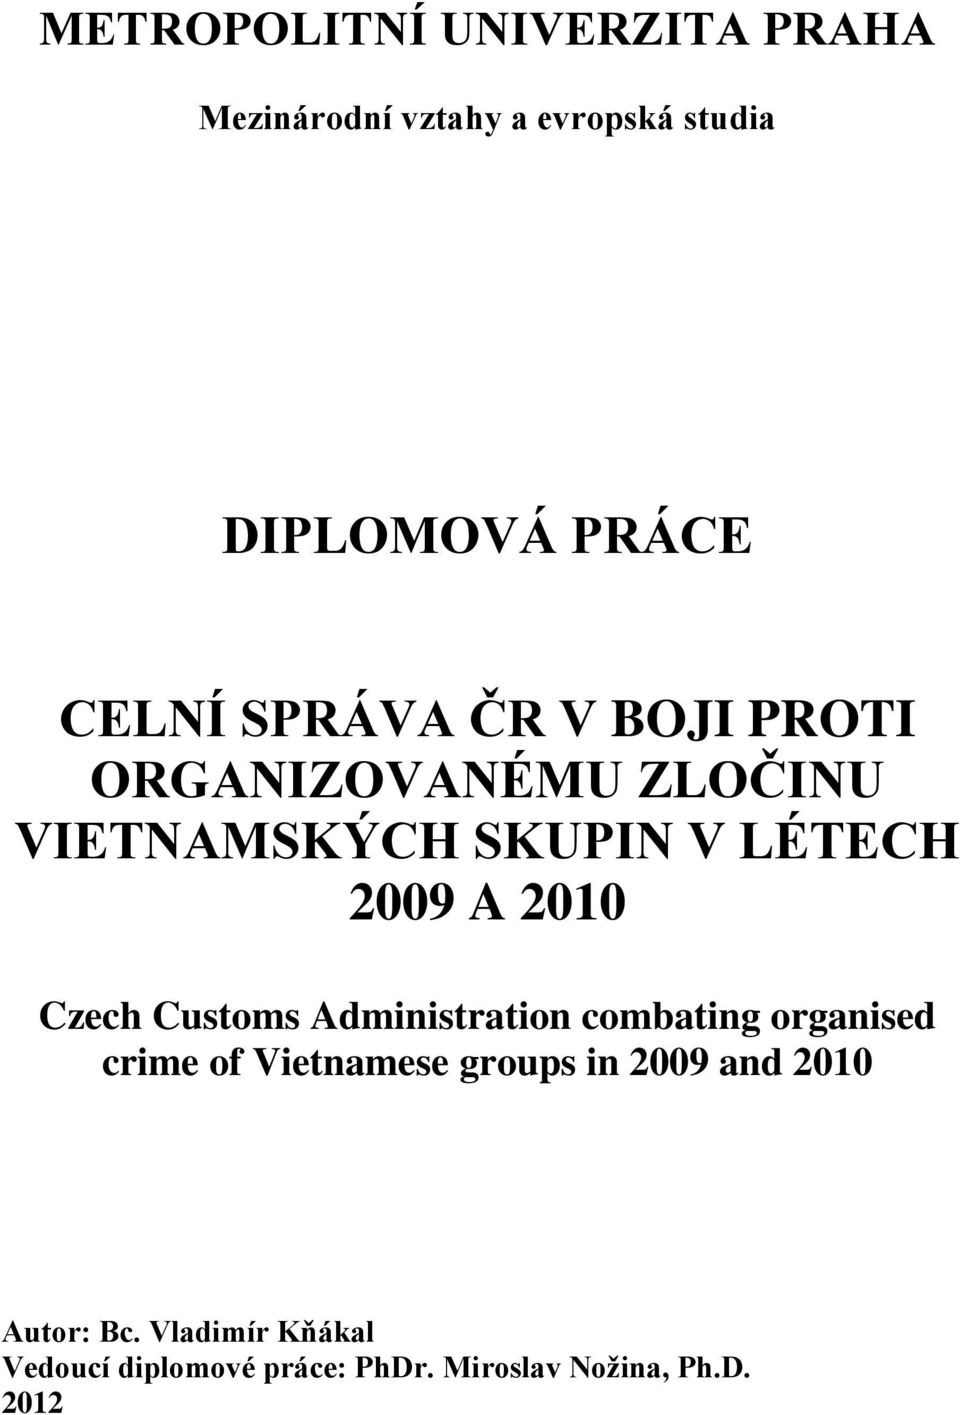 Czech Customs Administration combating organised crime of Vietnamese groups in 2009 and